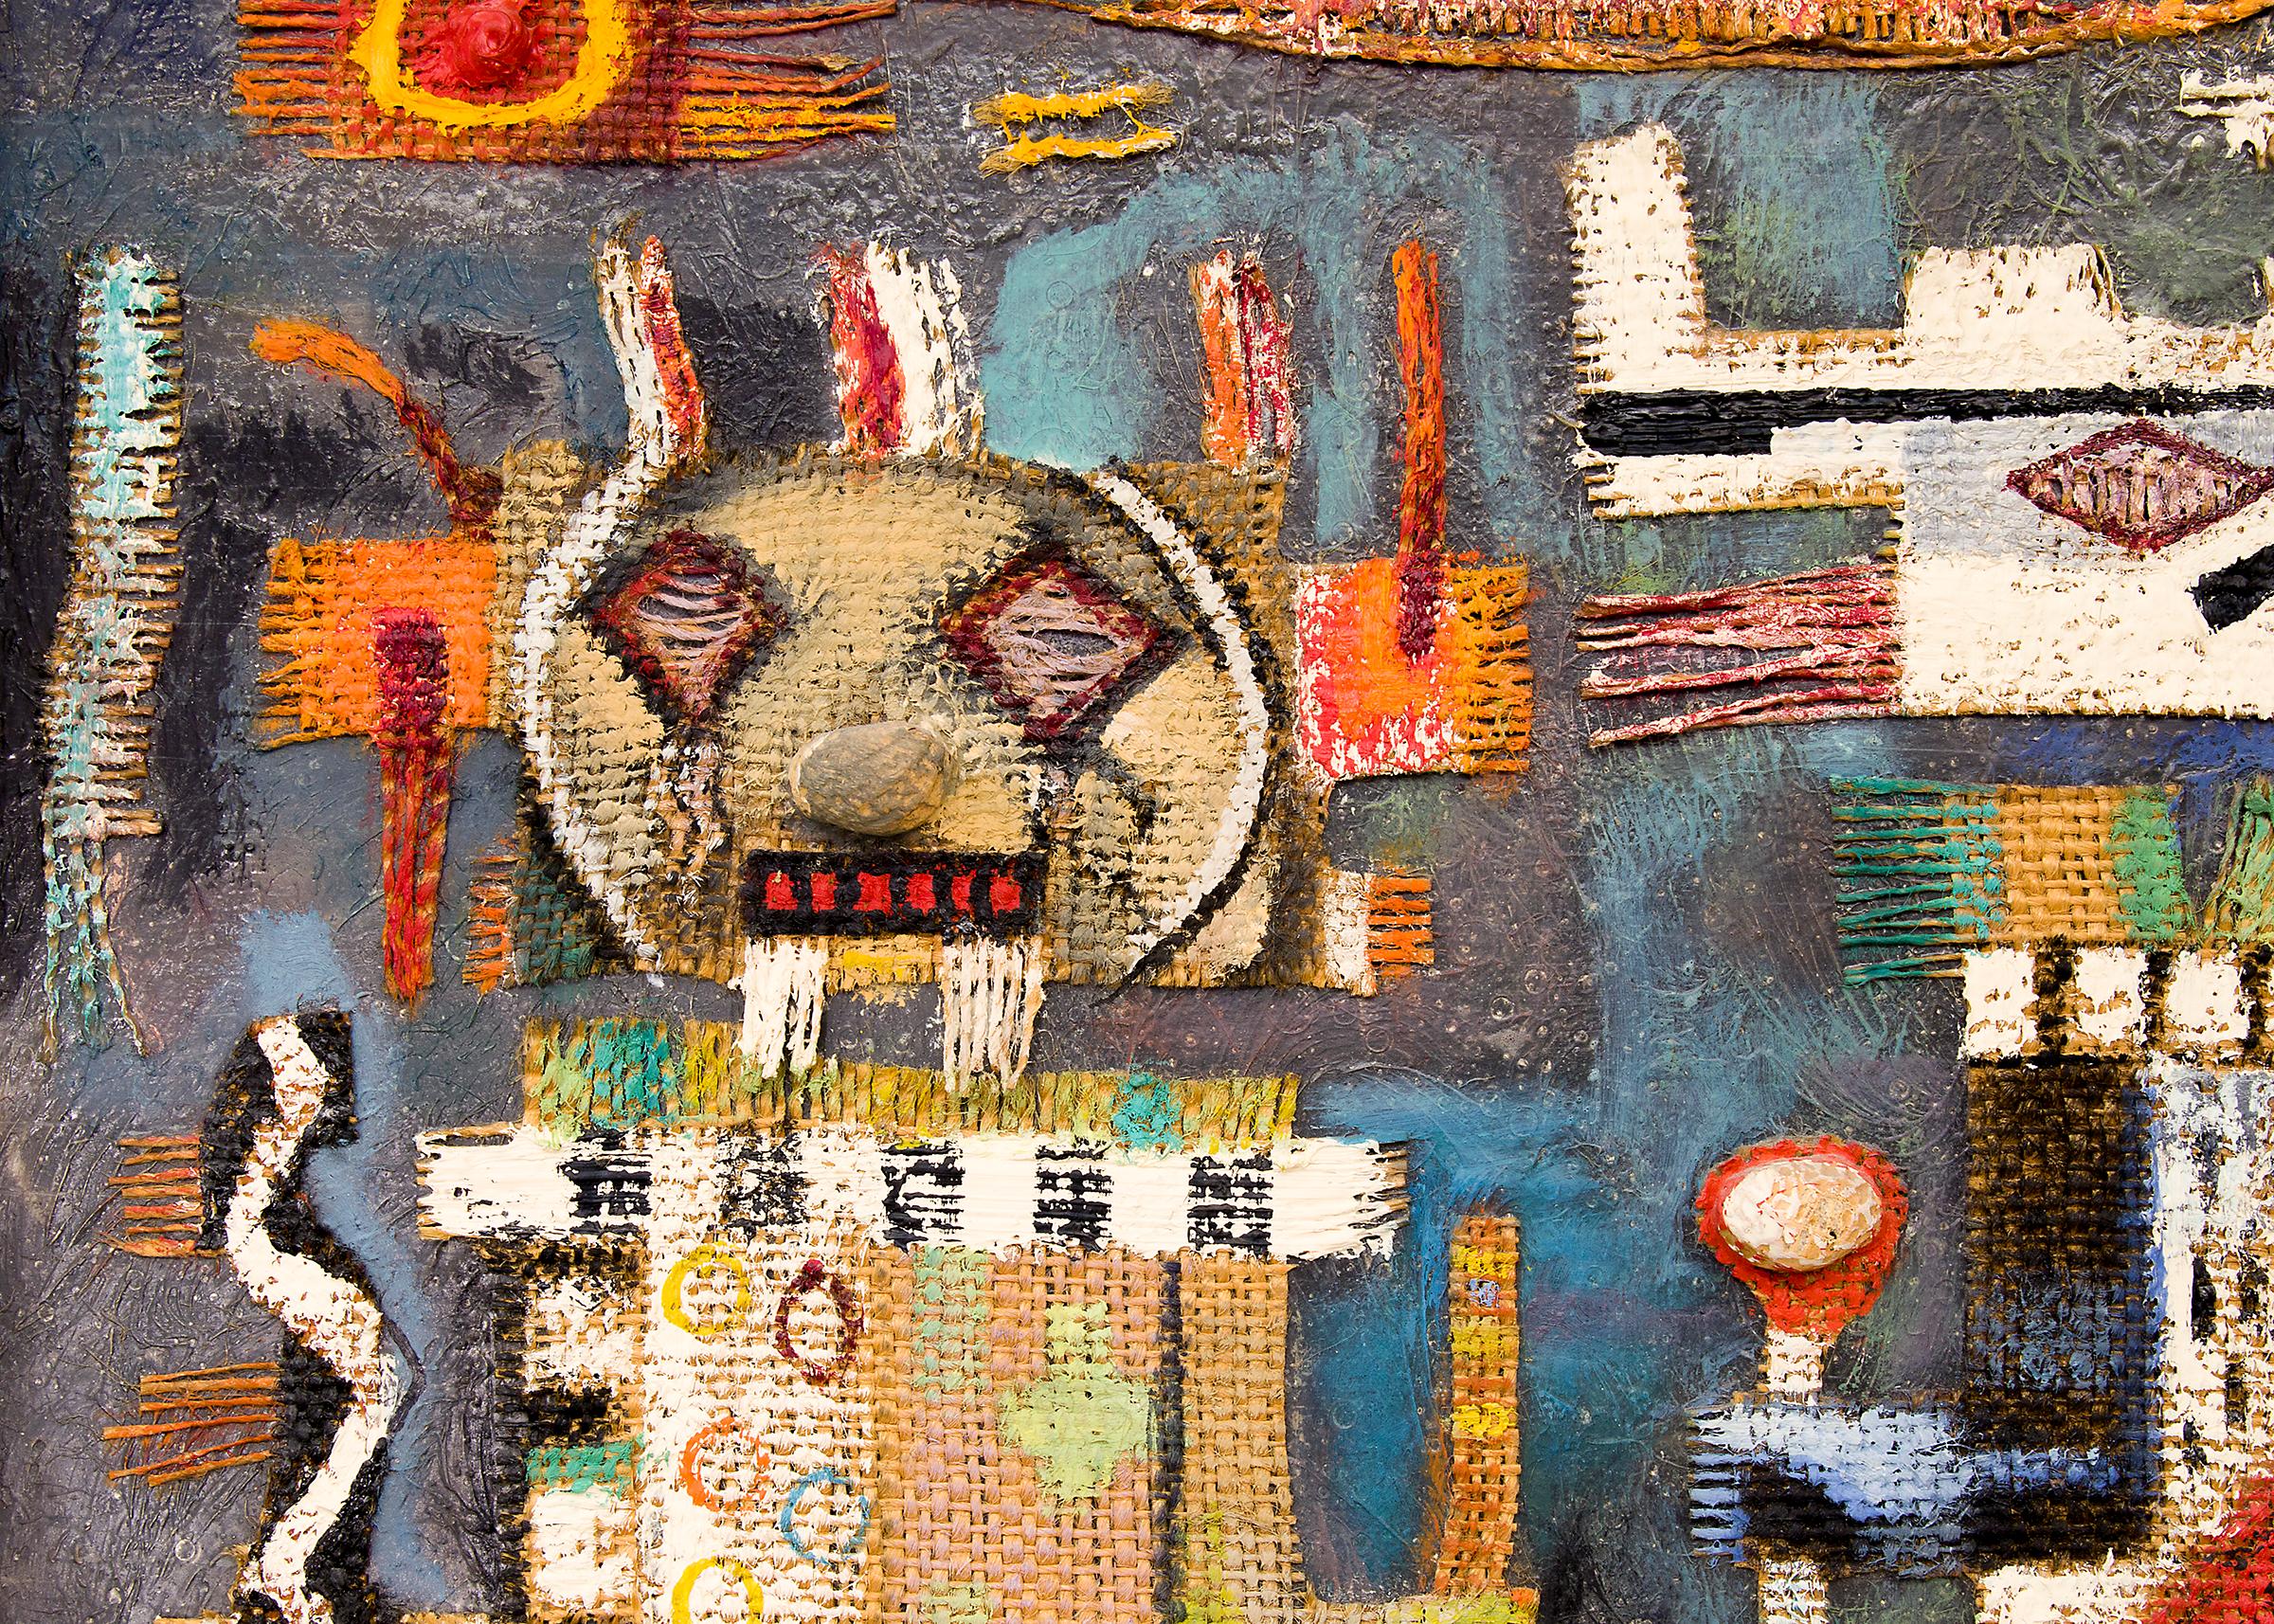 Deities - Vintage 1960s semi-abstract mixed media oil painting with Native American Pueblo Kachina (Katsina) Dolls by 20th century Taos, New Mexico artist, Charles Stewart (1922-2011). Assemblage/Collage with oil paint, fabric, peanut shells on